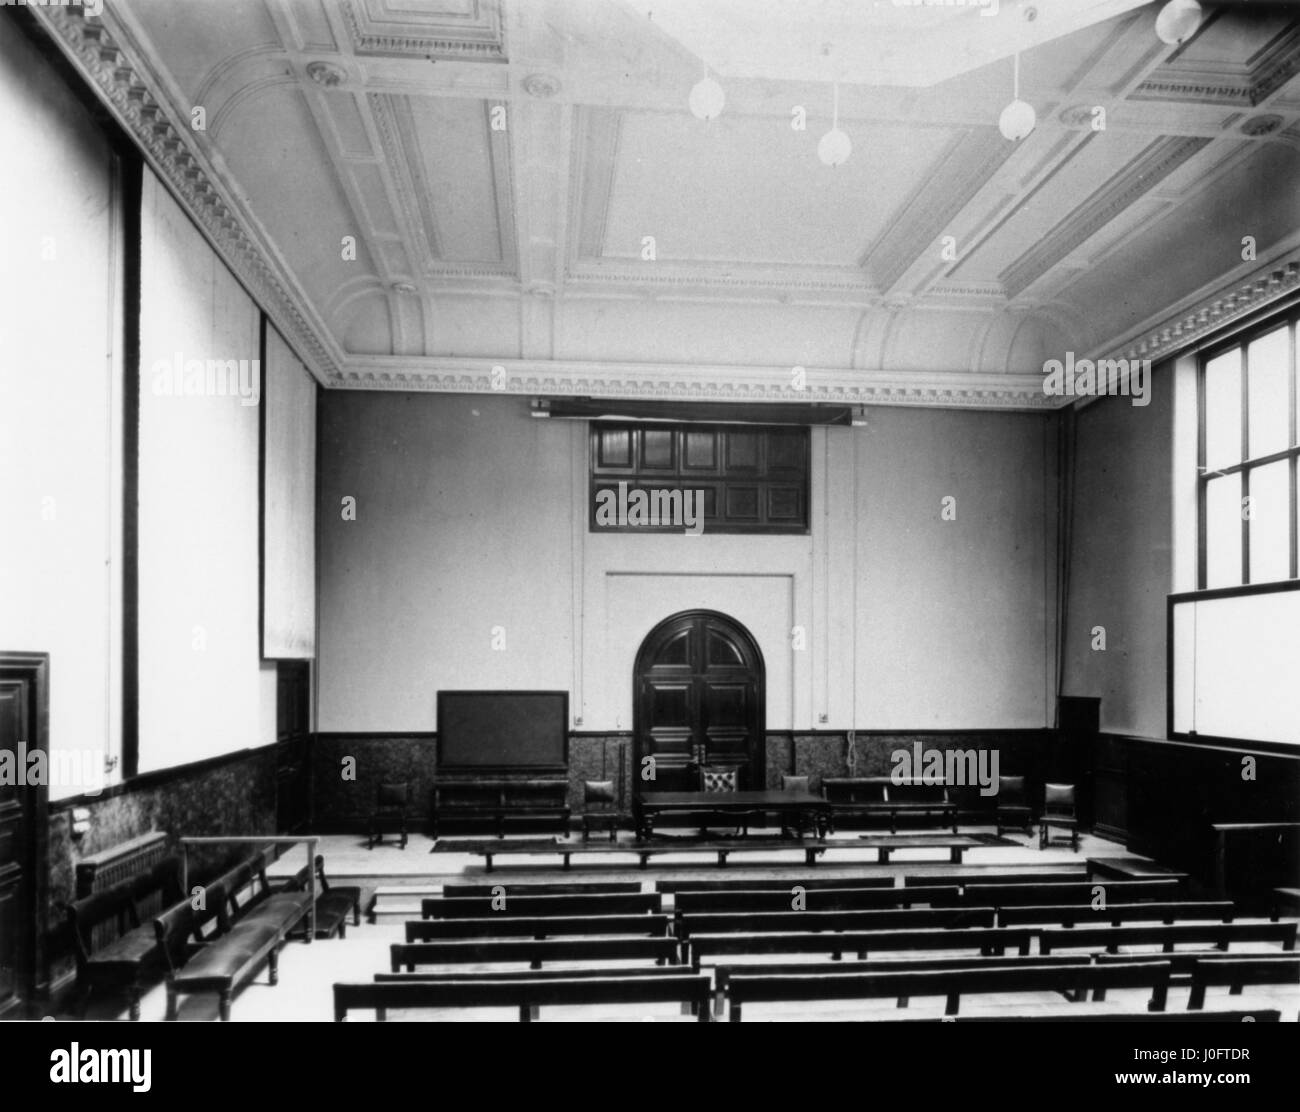 Institution of Mechanical Engineers headquarters, lecture hall showing windows and skylight Stock Photo